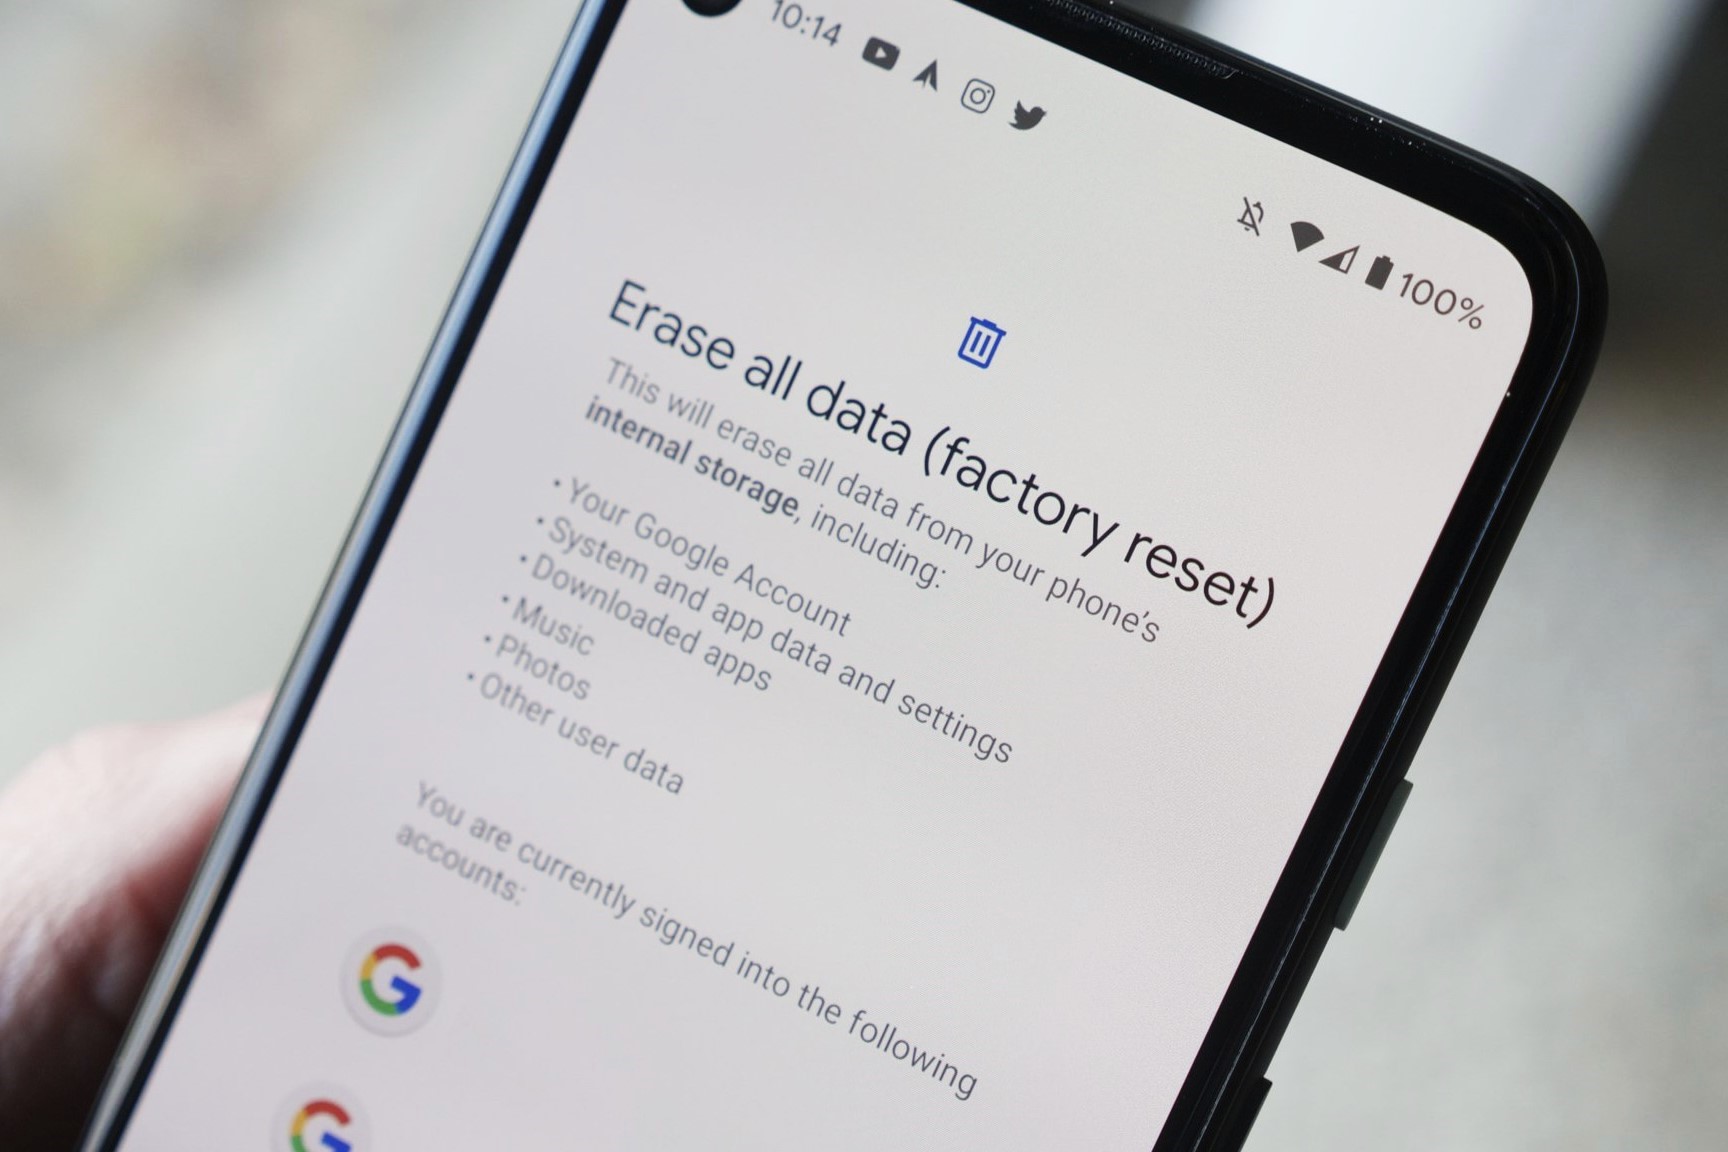 Master Reset: Resetting Your Pixel 6 Phone